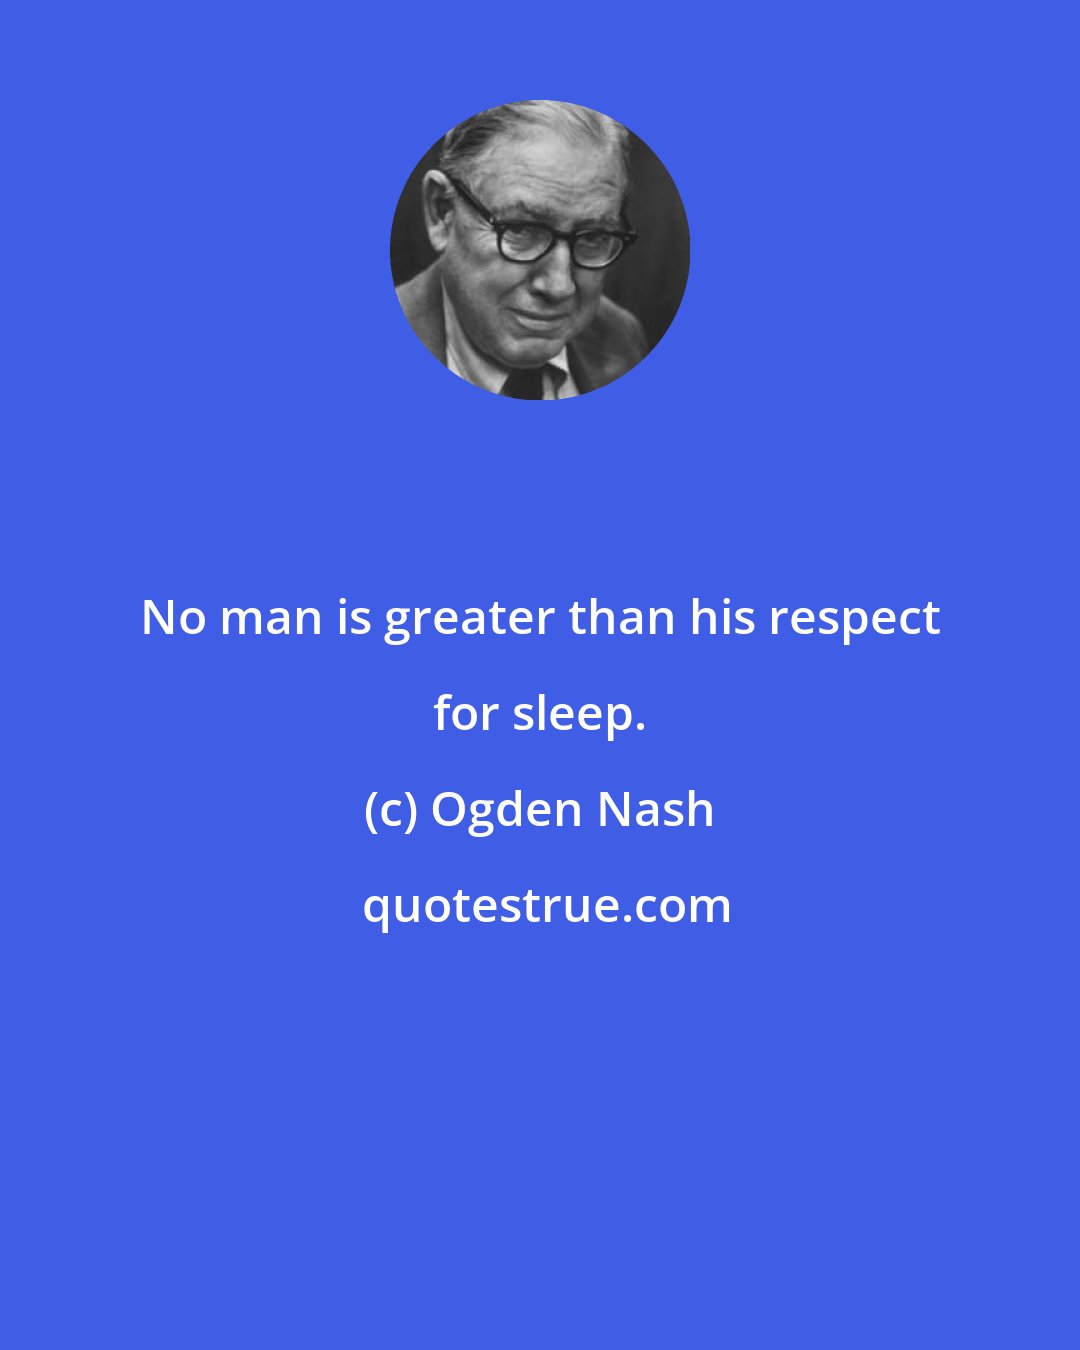 Ogden Nash: No man is greater than his respect for sleep.